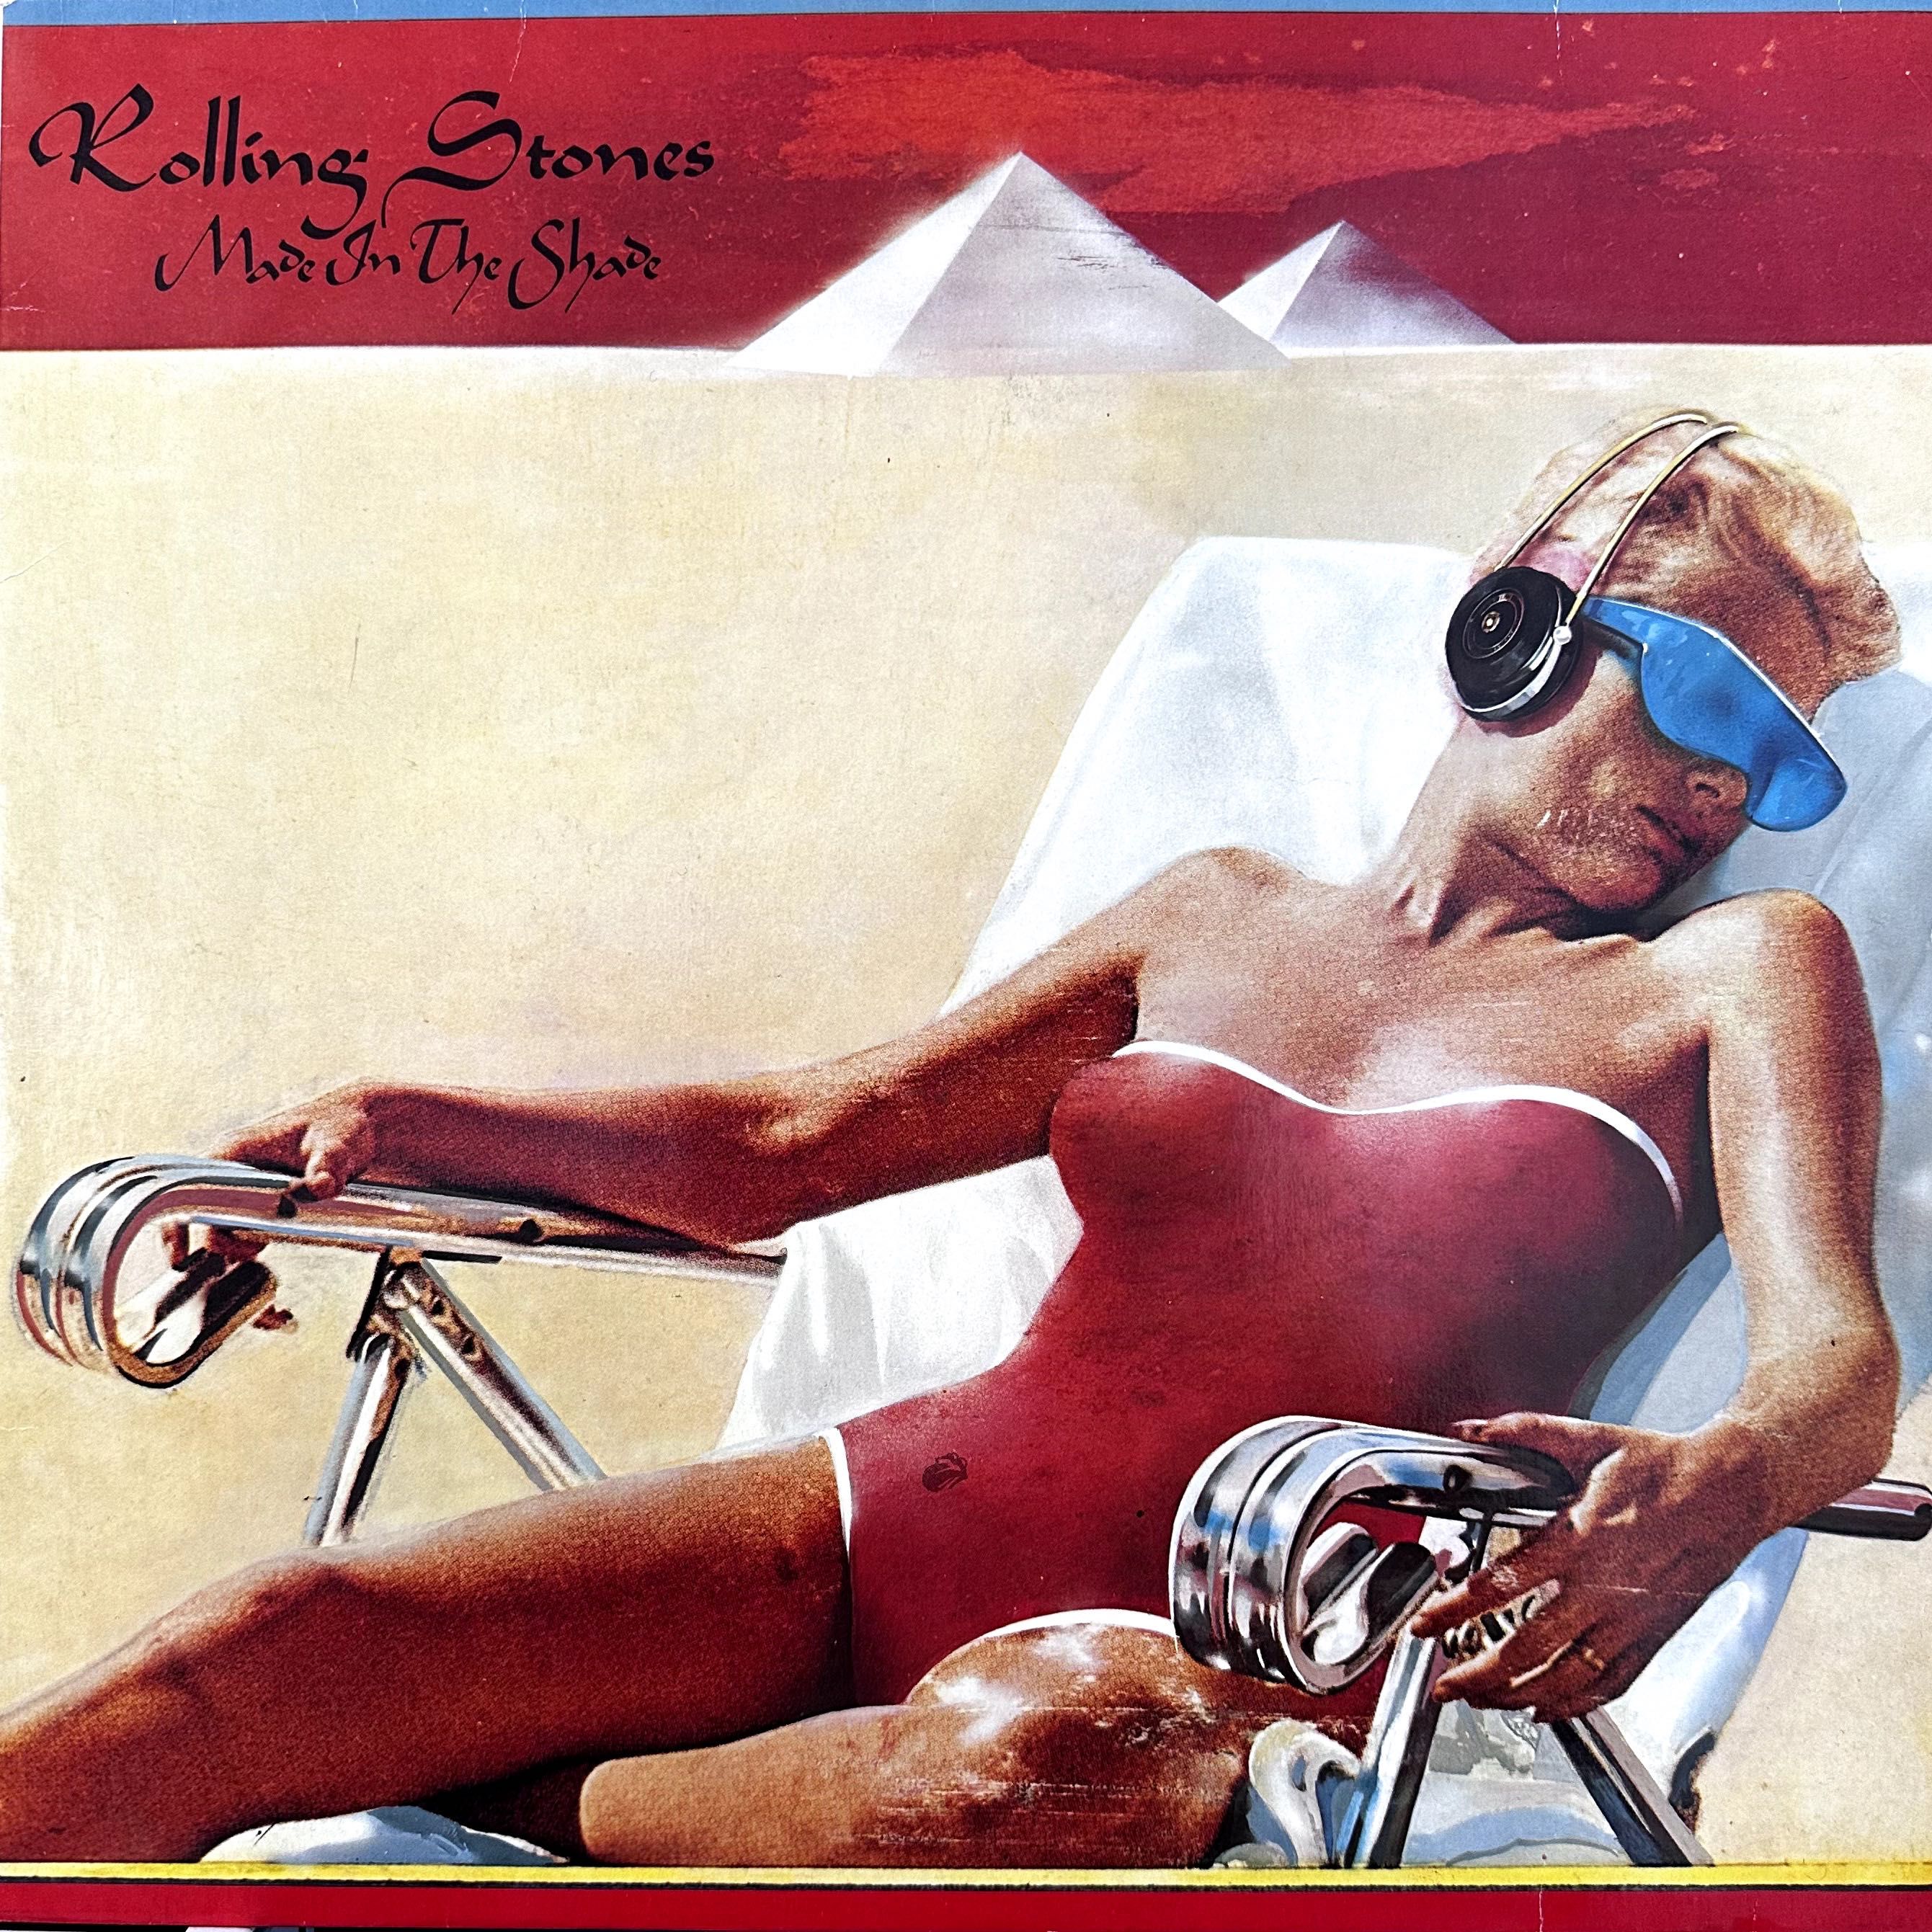 The Rolling Stones - Made in the Shade (Vinyl, 1979, Germany)